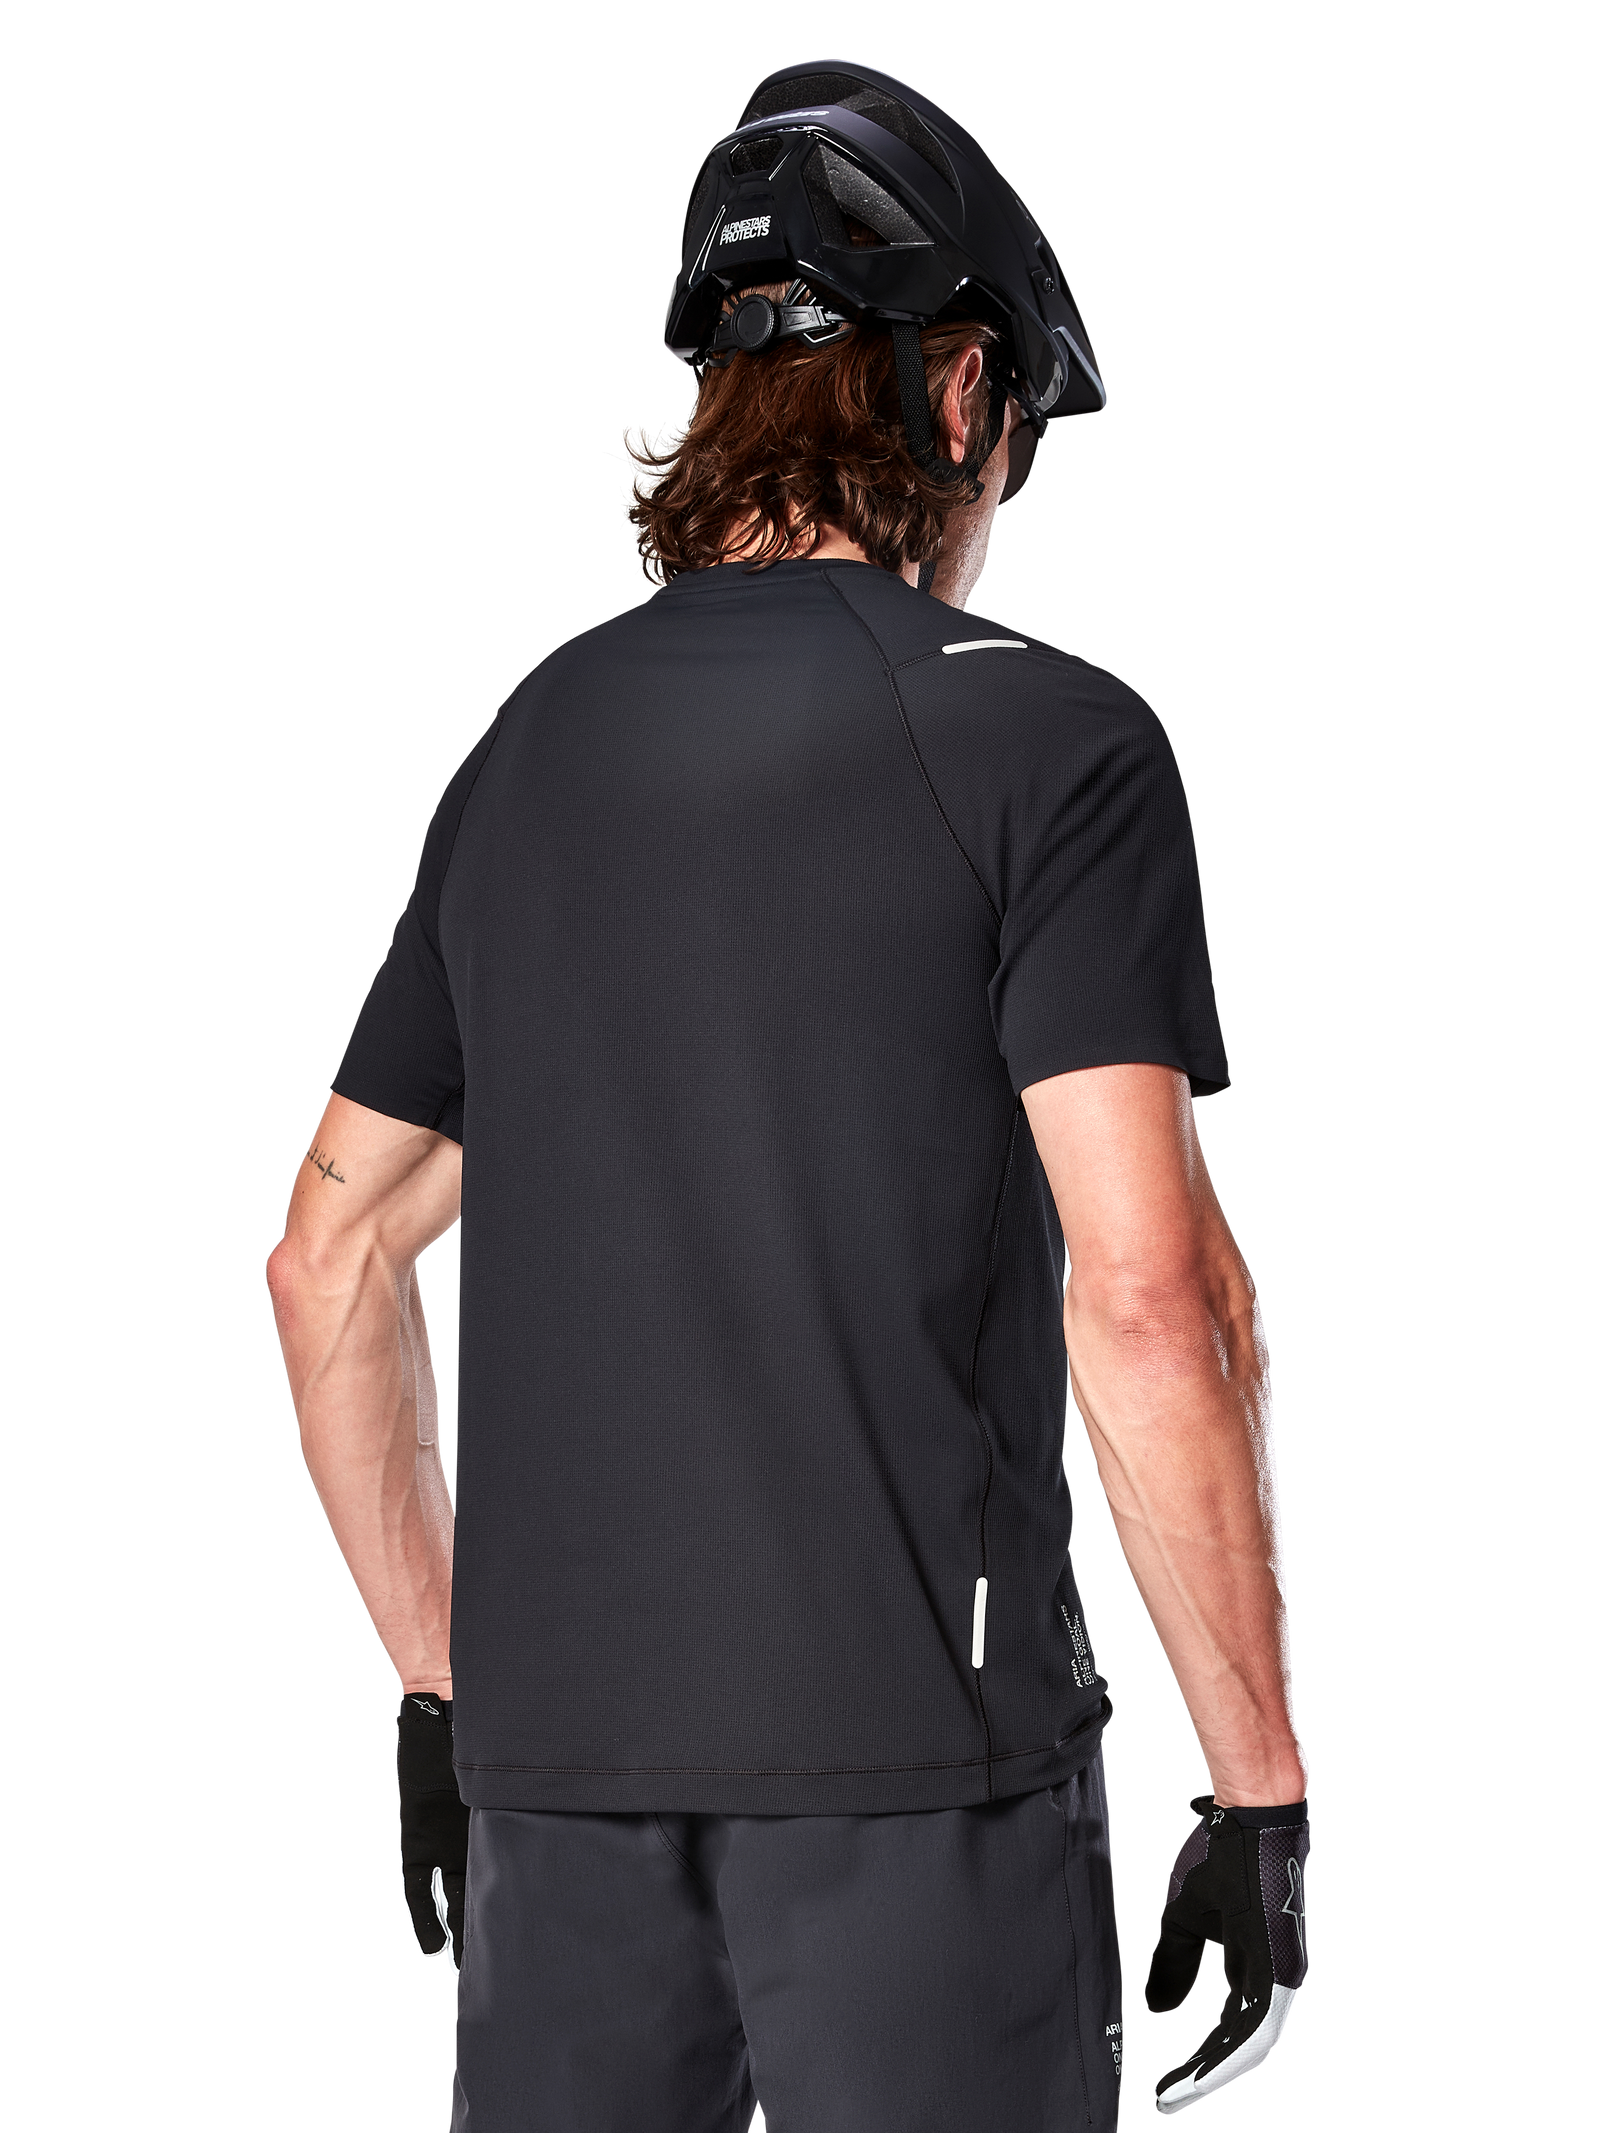 A-Aria Switch Jersey - Short Sleeve